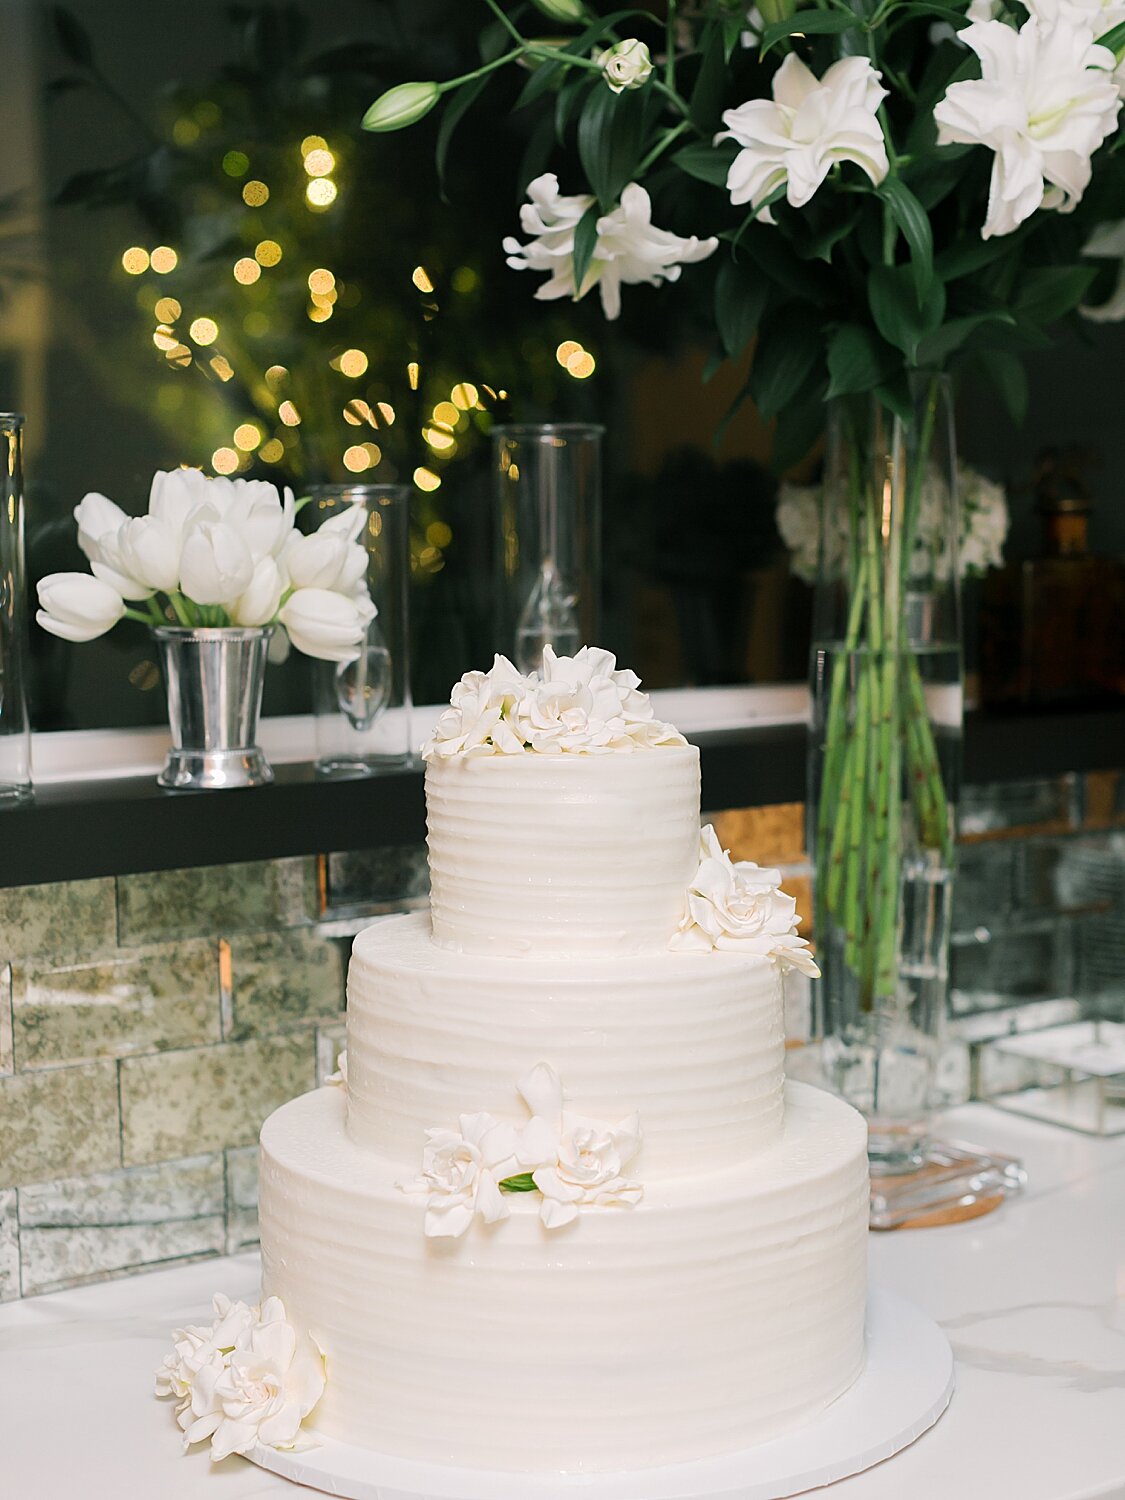 tiered wedding cake for reception | Stylish Private Home Wedding Inspiration | Asher Gardner Photography